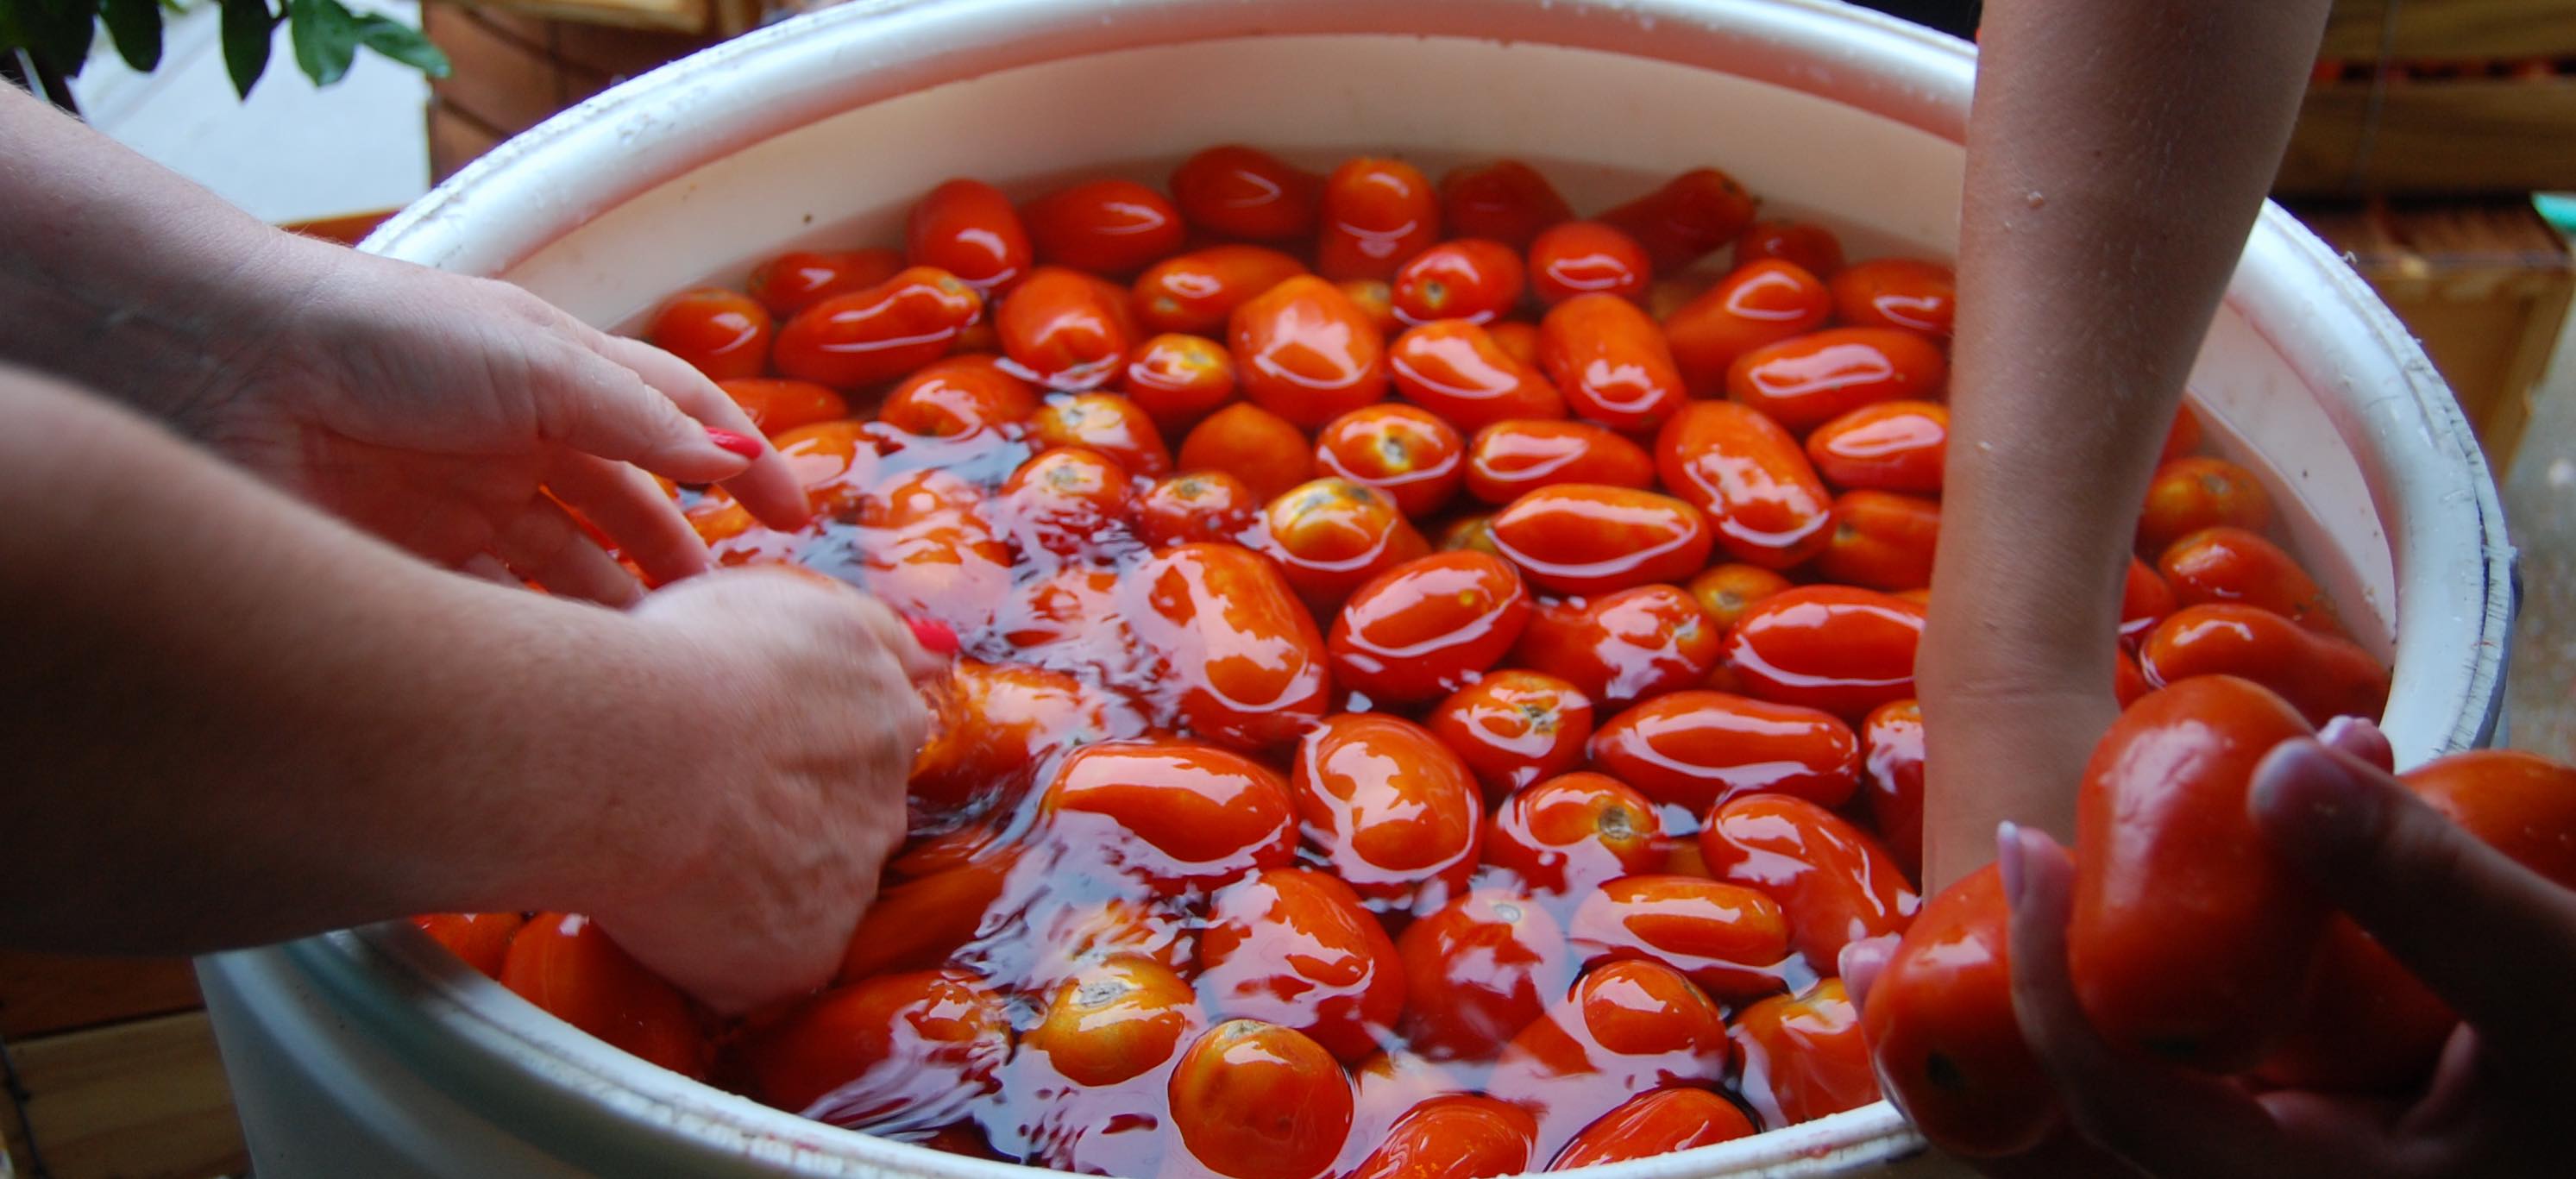 making tomato sauce, journal of wild culture ©2022